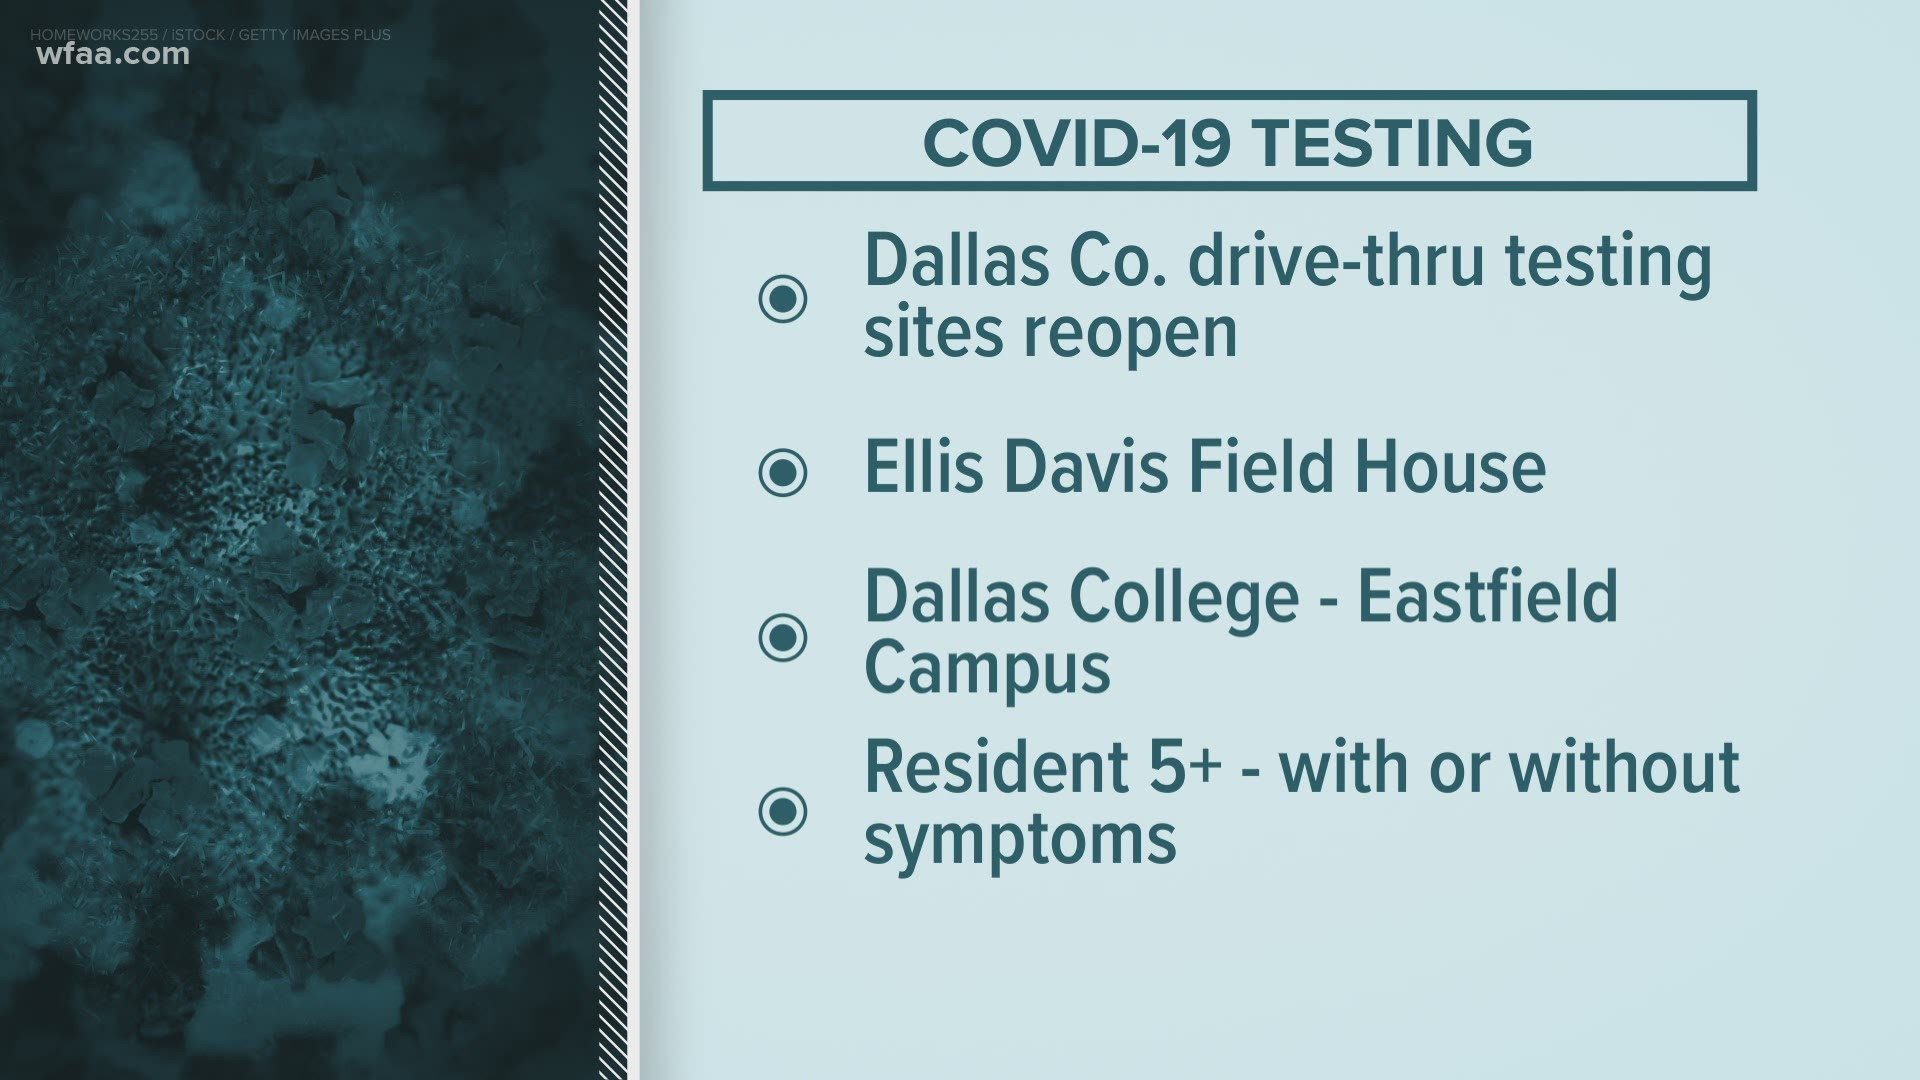 COVID-19 testing sites were closed for Thanksgiving but reopened.